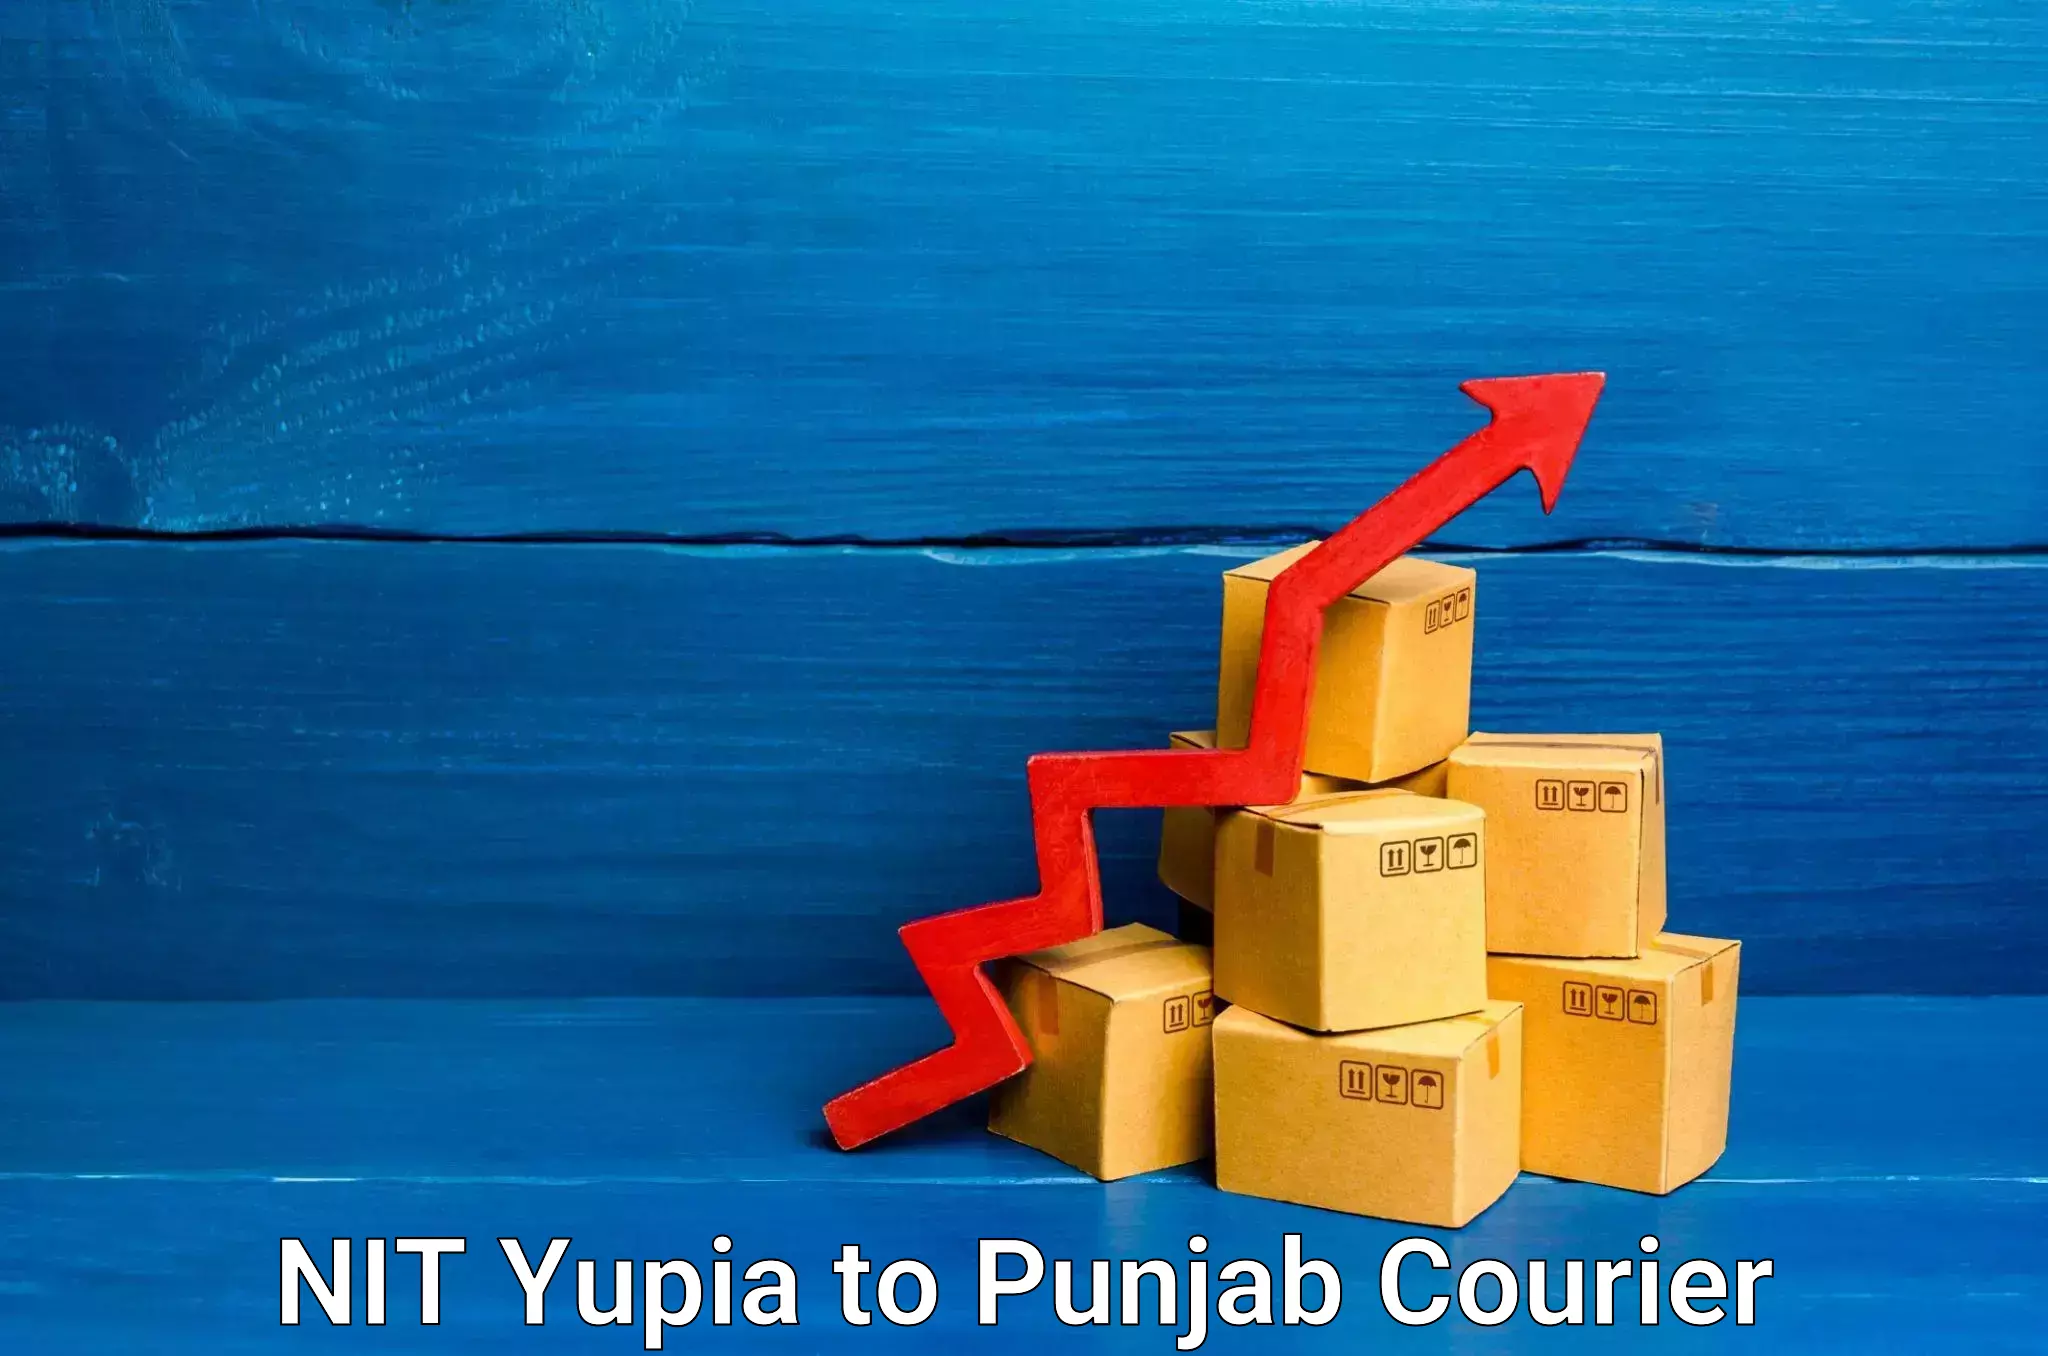 Air courier services NIT Yupia to Ludhiana